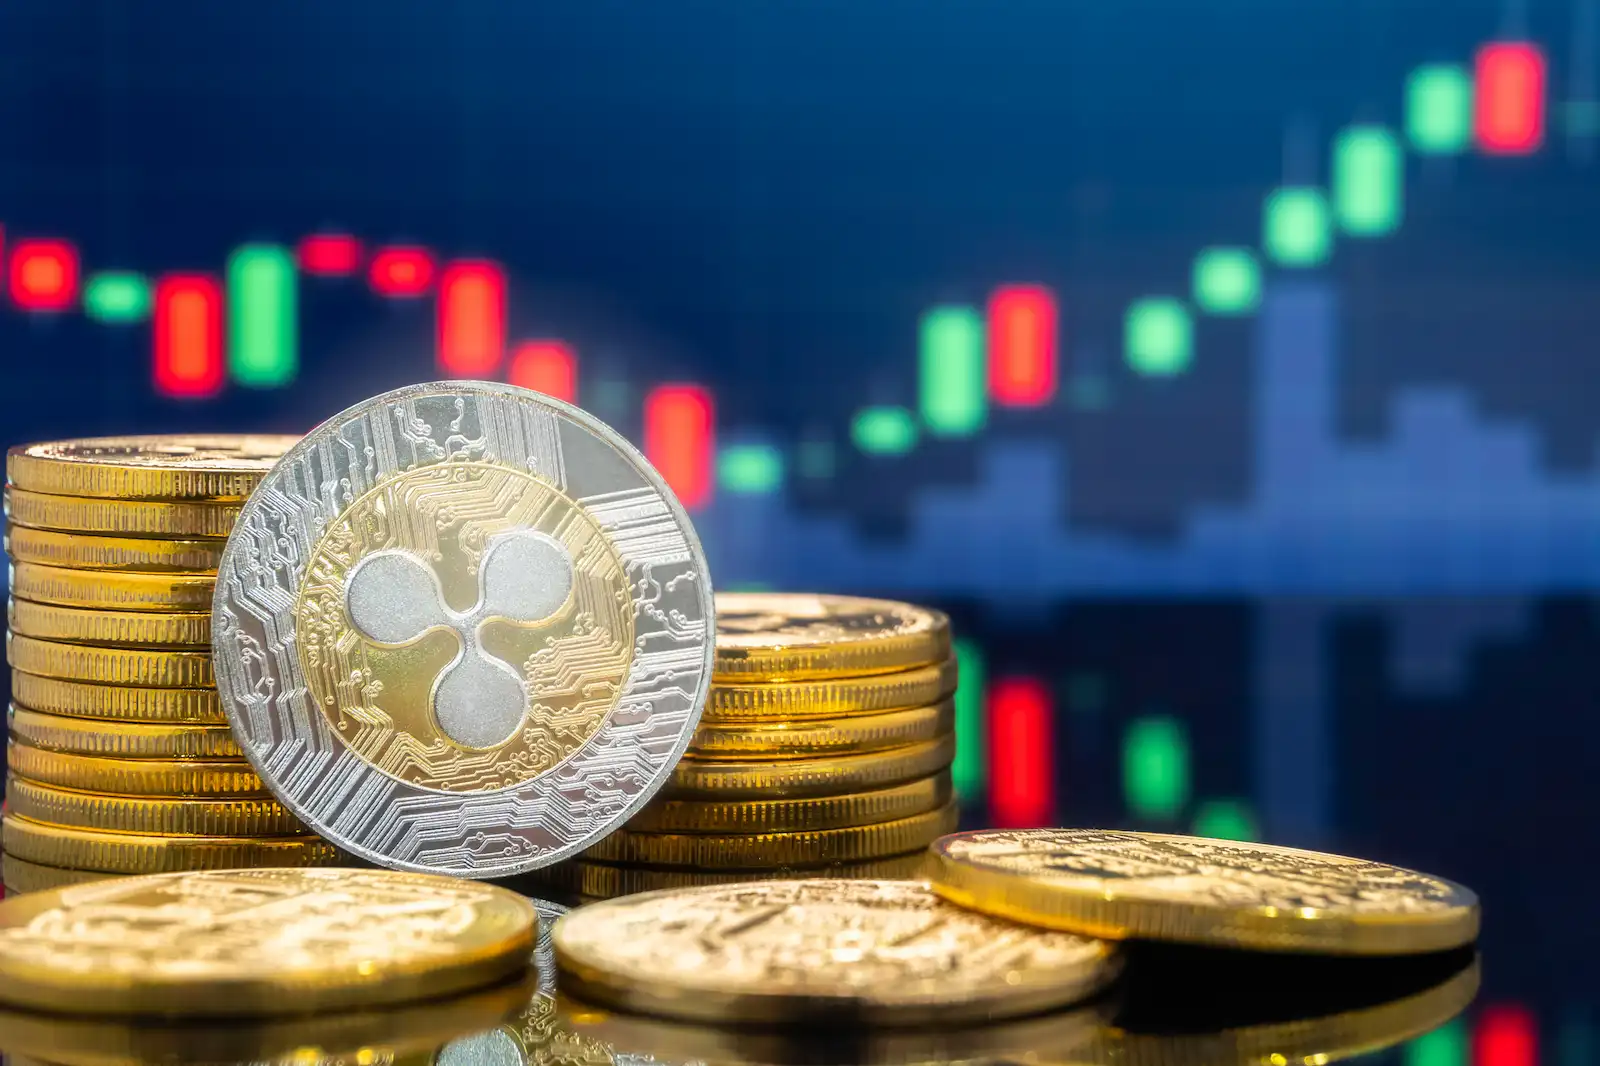 XRP Price Prediction: Bulls Need To Clear $0.50 For Hopes of a Fresh Rally